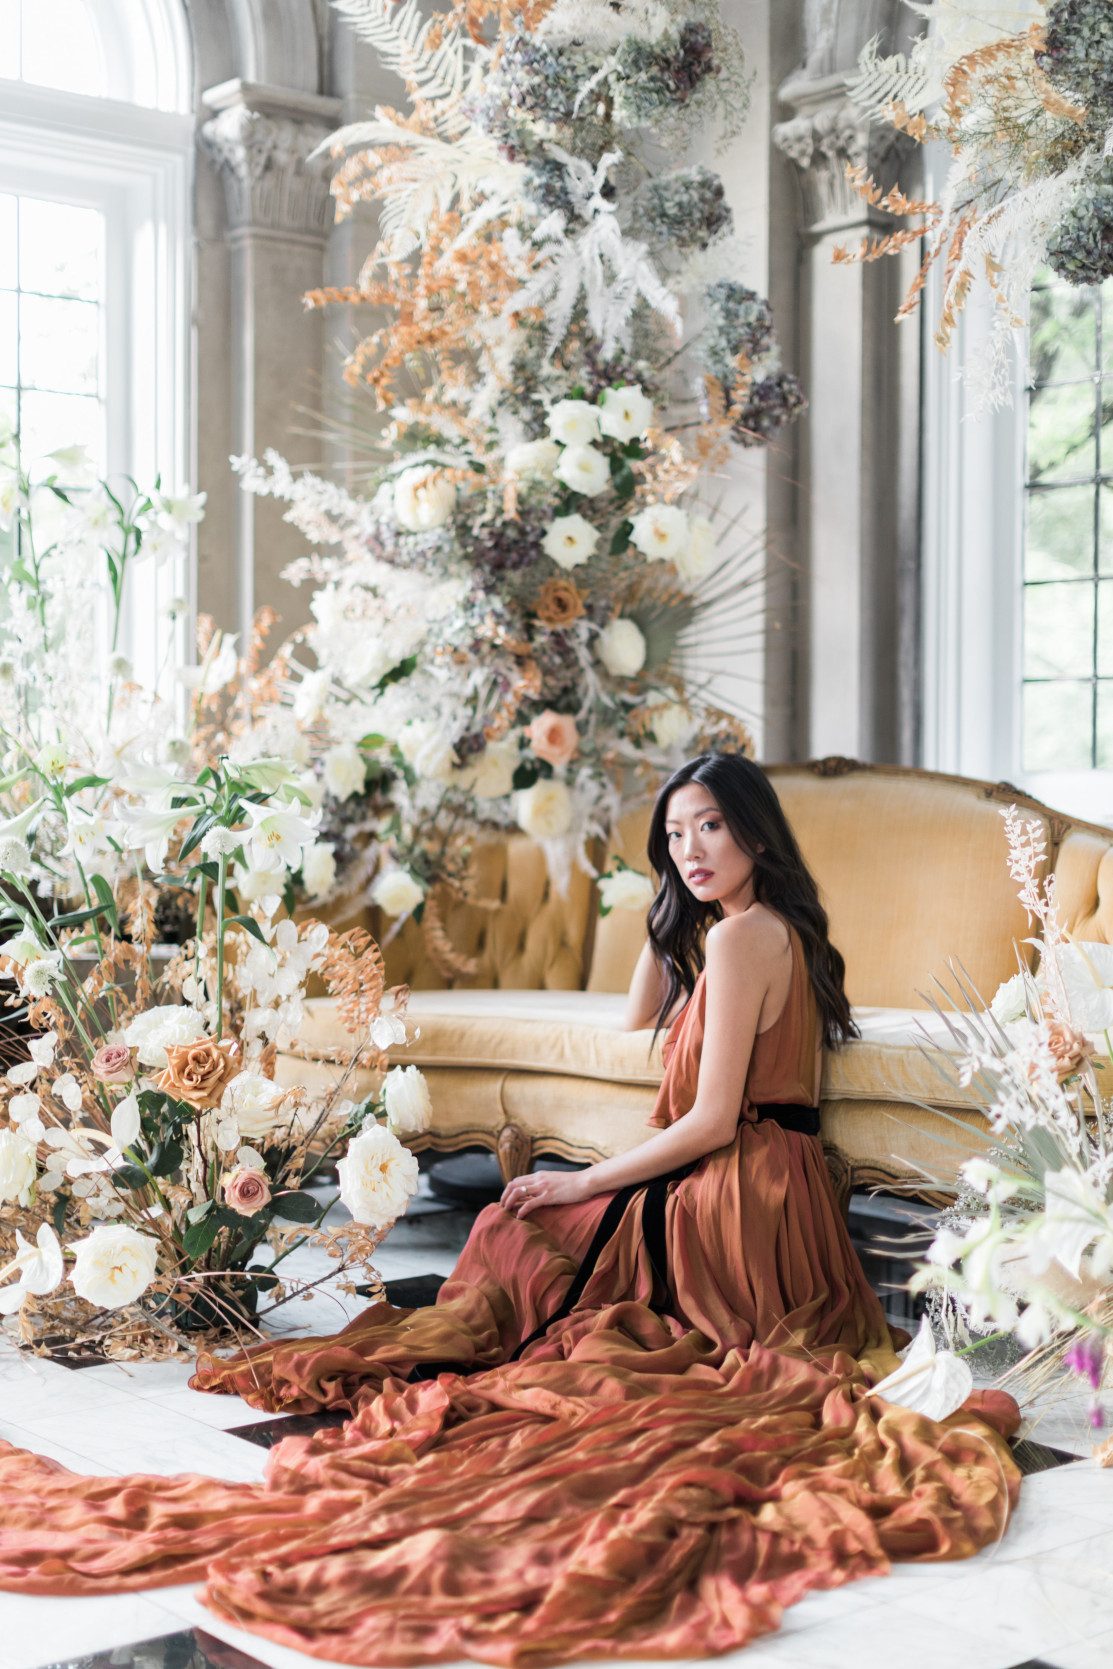 Bride in a rust colored wedding dress sitting in front of a delicate yet decadent floral installation created by Isibeal Studio. Created for a beautiful micro wedding in a historic venue.